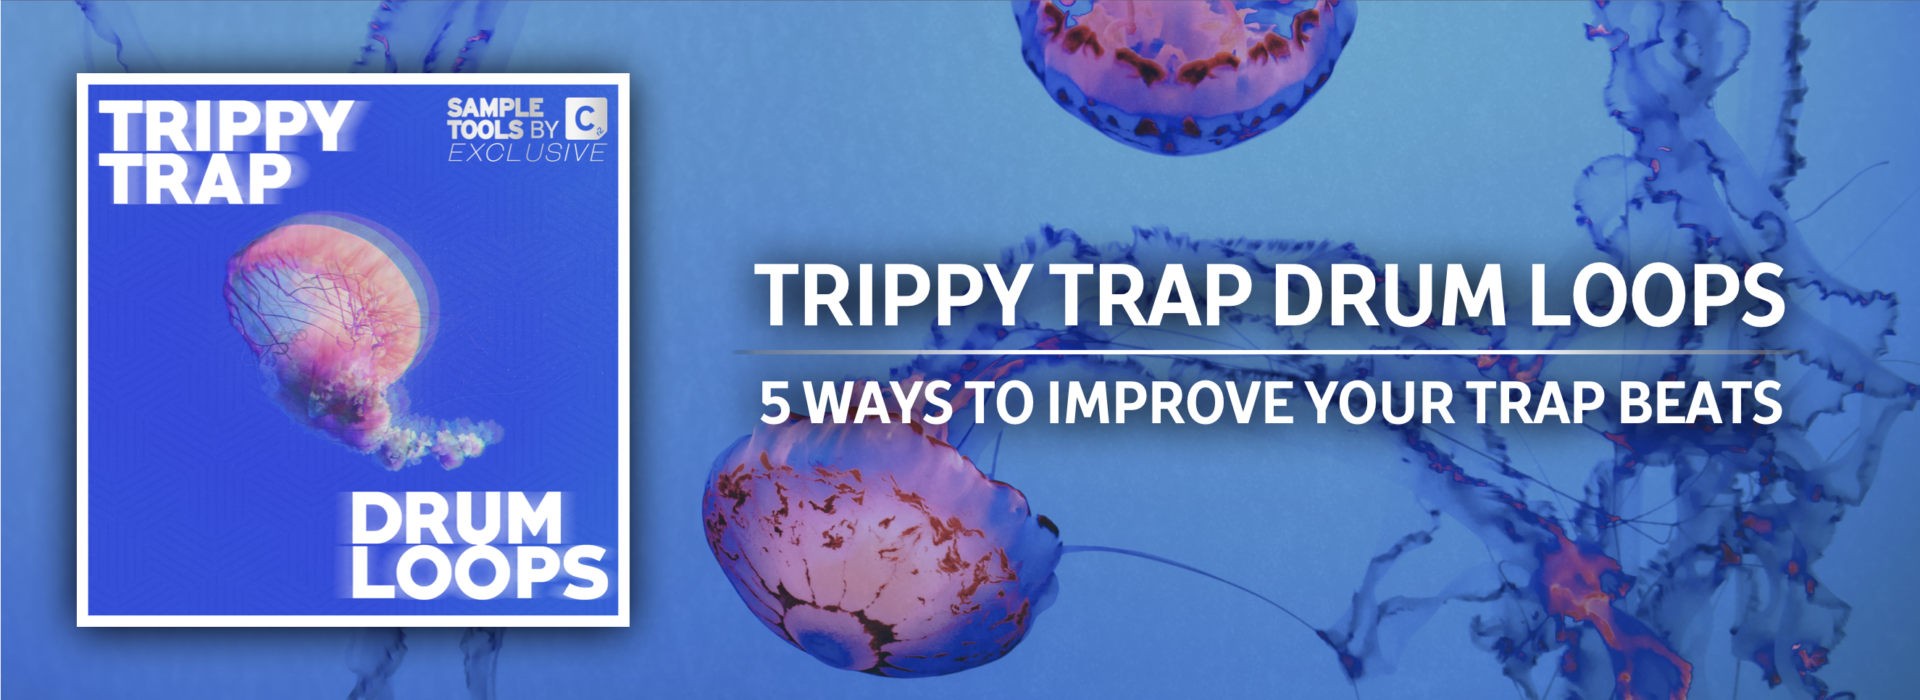 Trippy Trap Drum Loops: 5 Tips to Improve Your Trap Beats